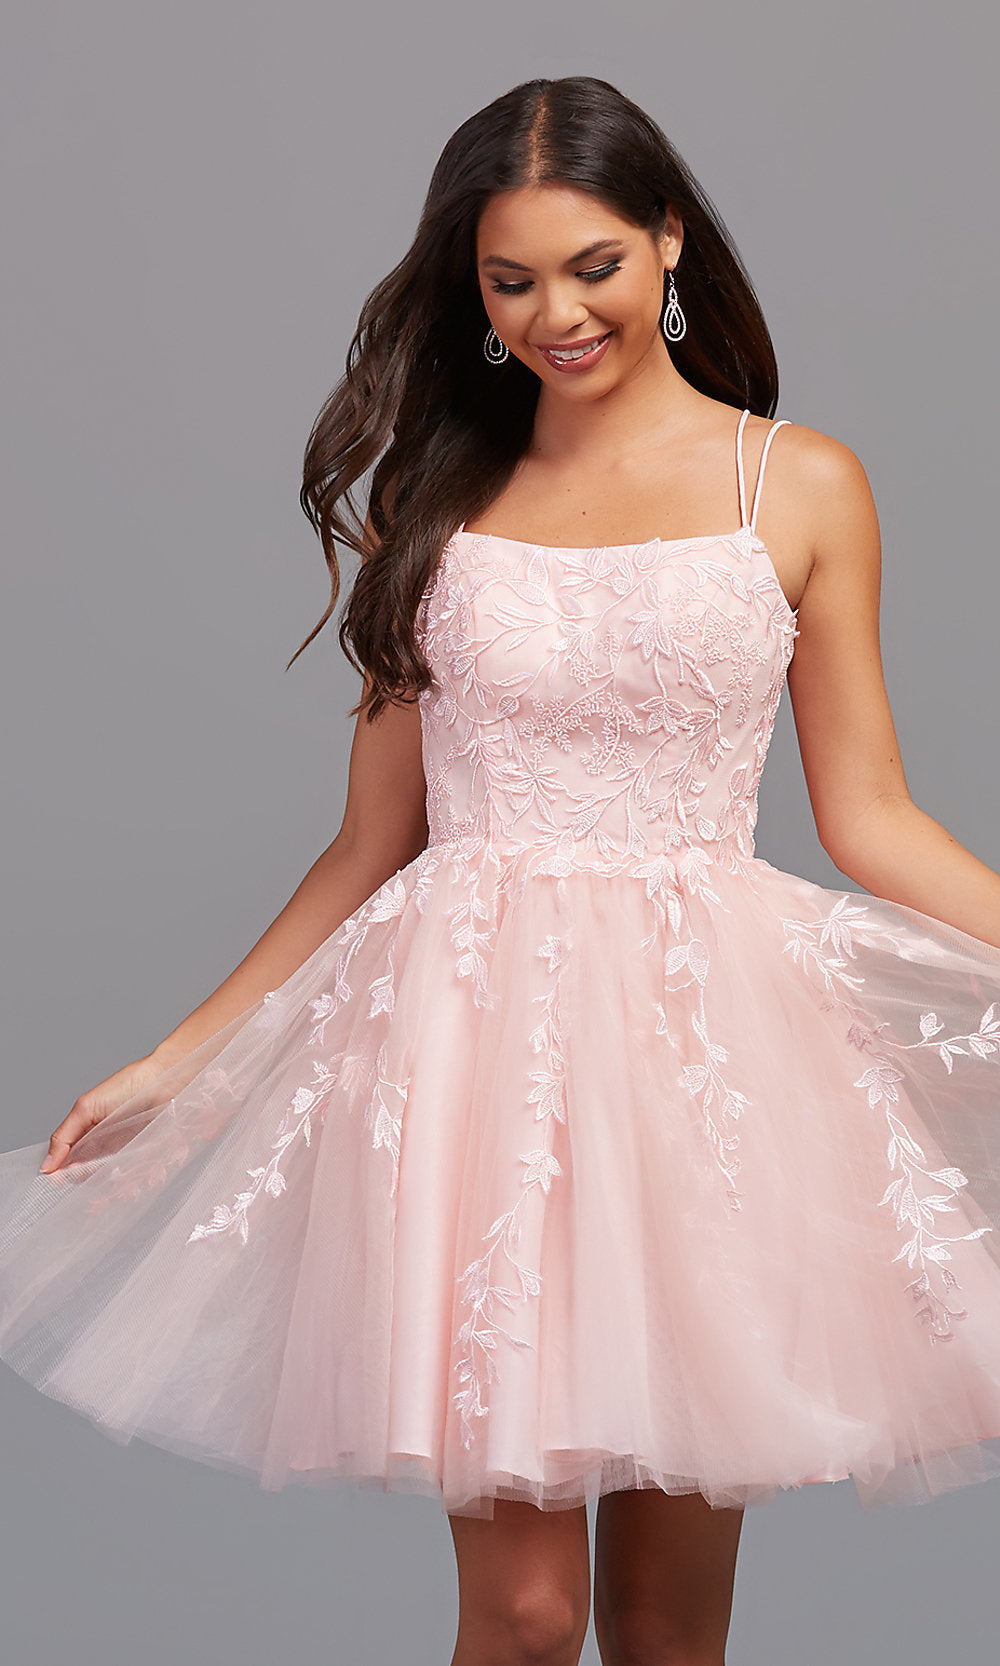 Sweetheart Pink Beaded Short homecoming Dress with Feathers, Cutest Pi |  Top wedding dresses, Prom dresses short, Short wedding dress